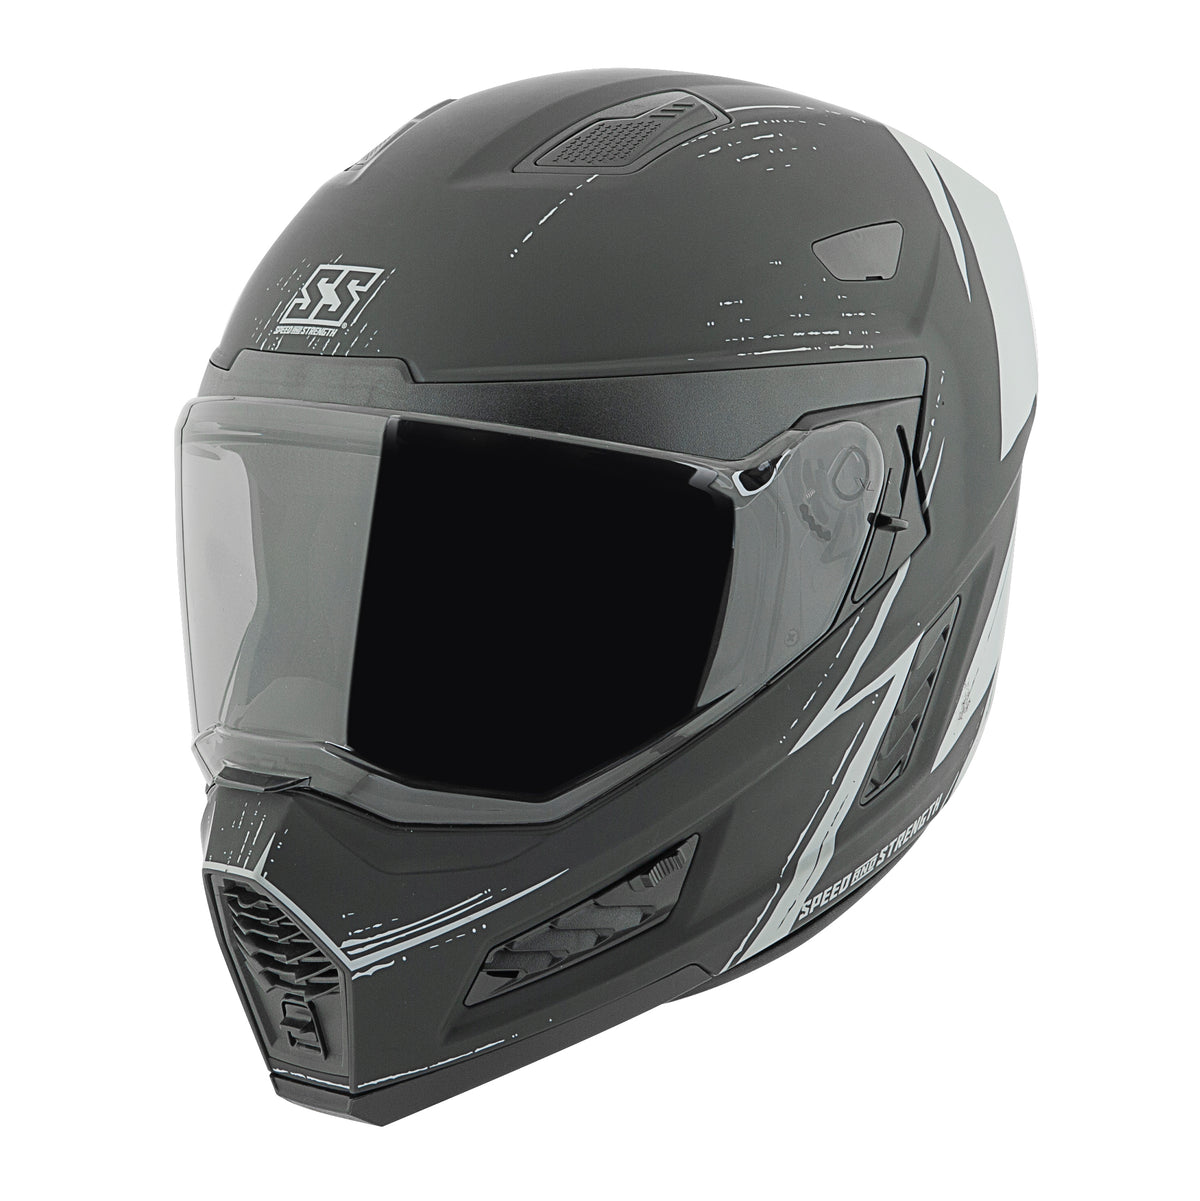 Off The Chain™ SS1550 Helmet